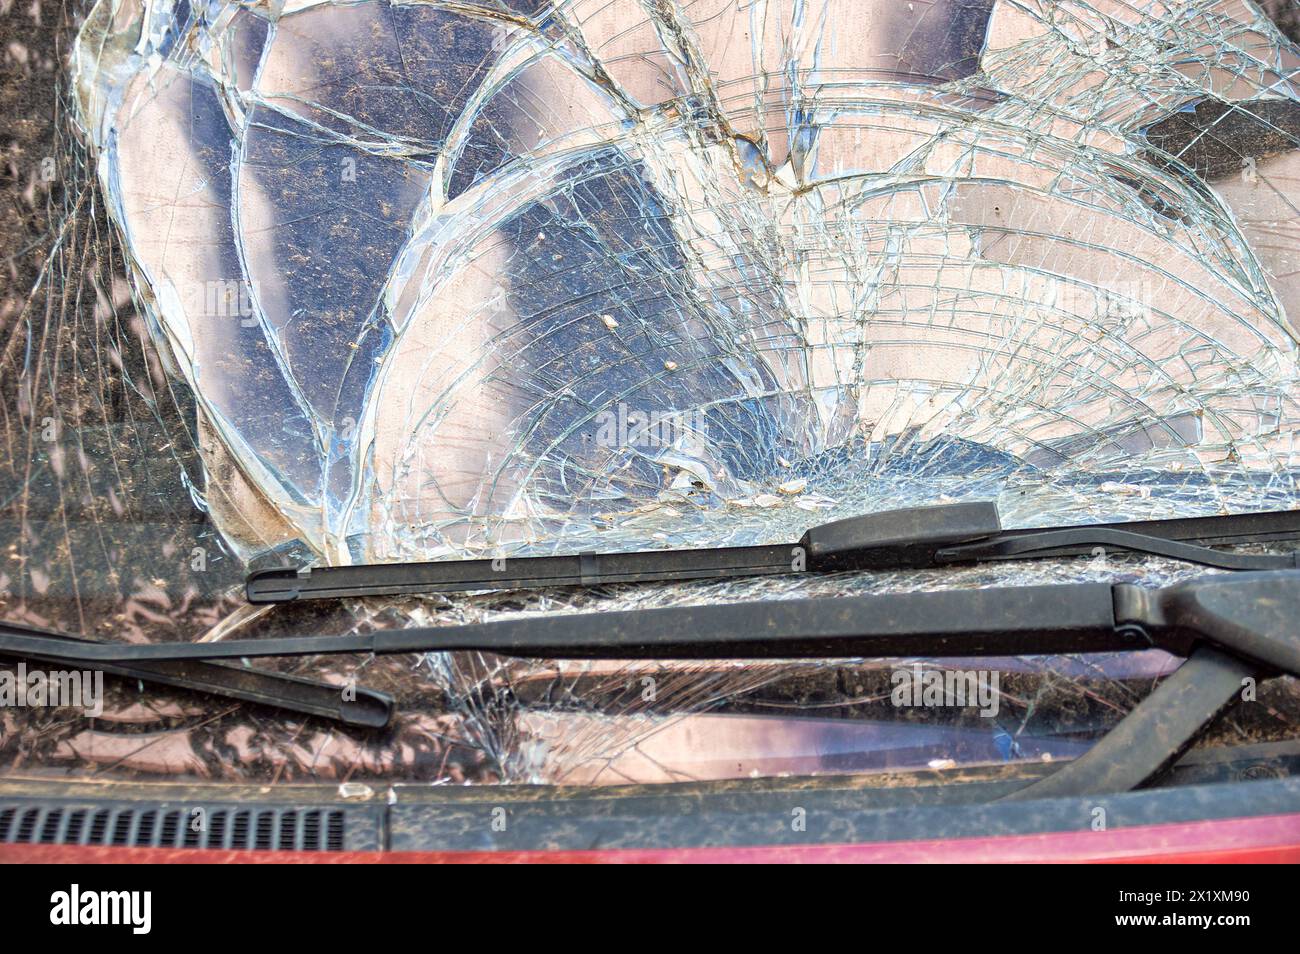 Detail of damage to windscreen of car shattered by vandalism Stock Photo